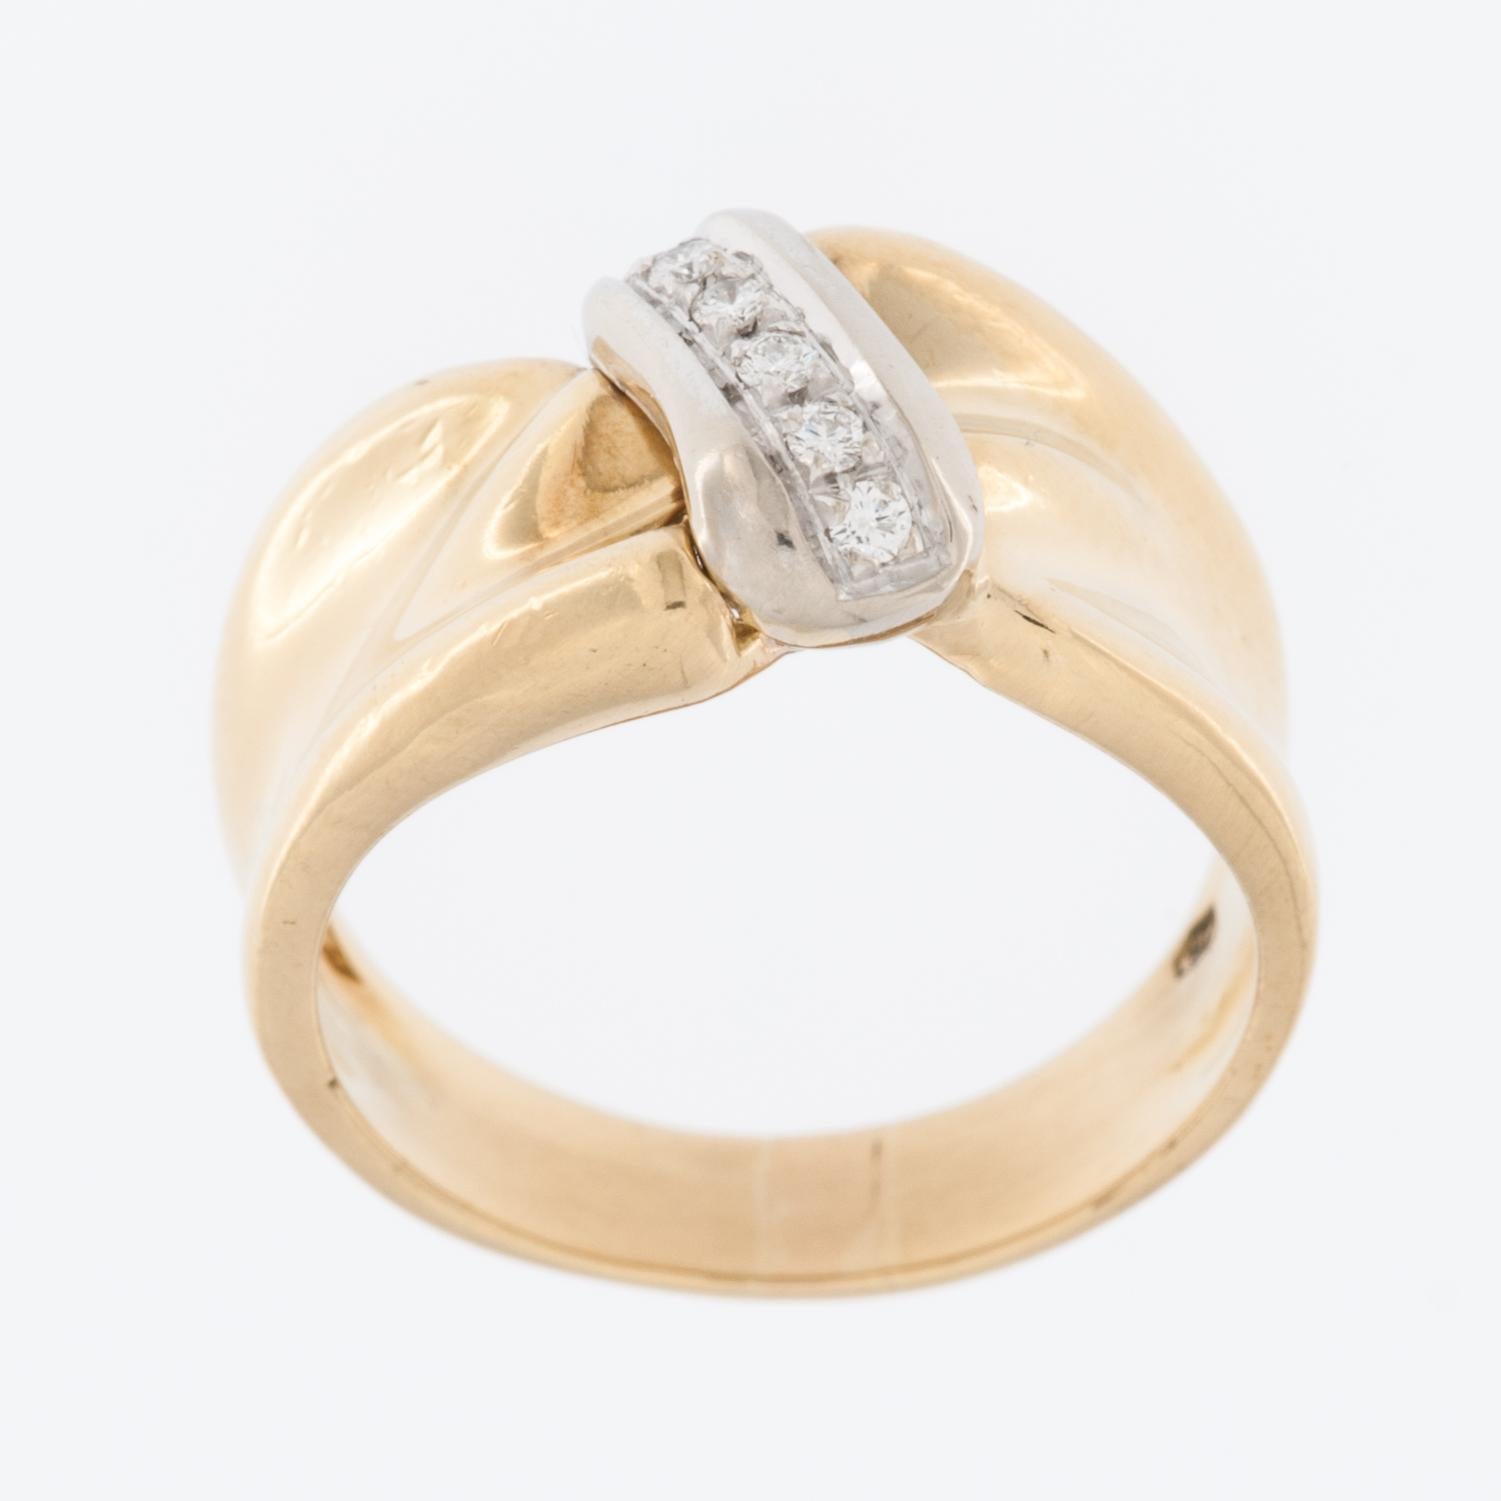 The Fashion Swiss 18kt Yellow and White Gold Ring with Diamonds is a stunning piece of jewelry that seamlessly combines luxurious materials with exquisite design elements.

Crafted with precision and artistry, the ring features a blend of 18kt